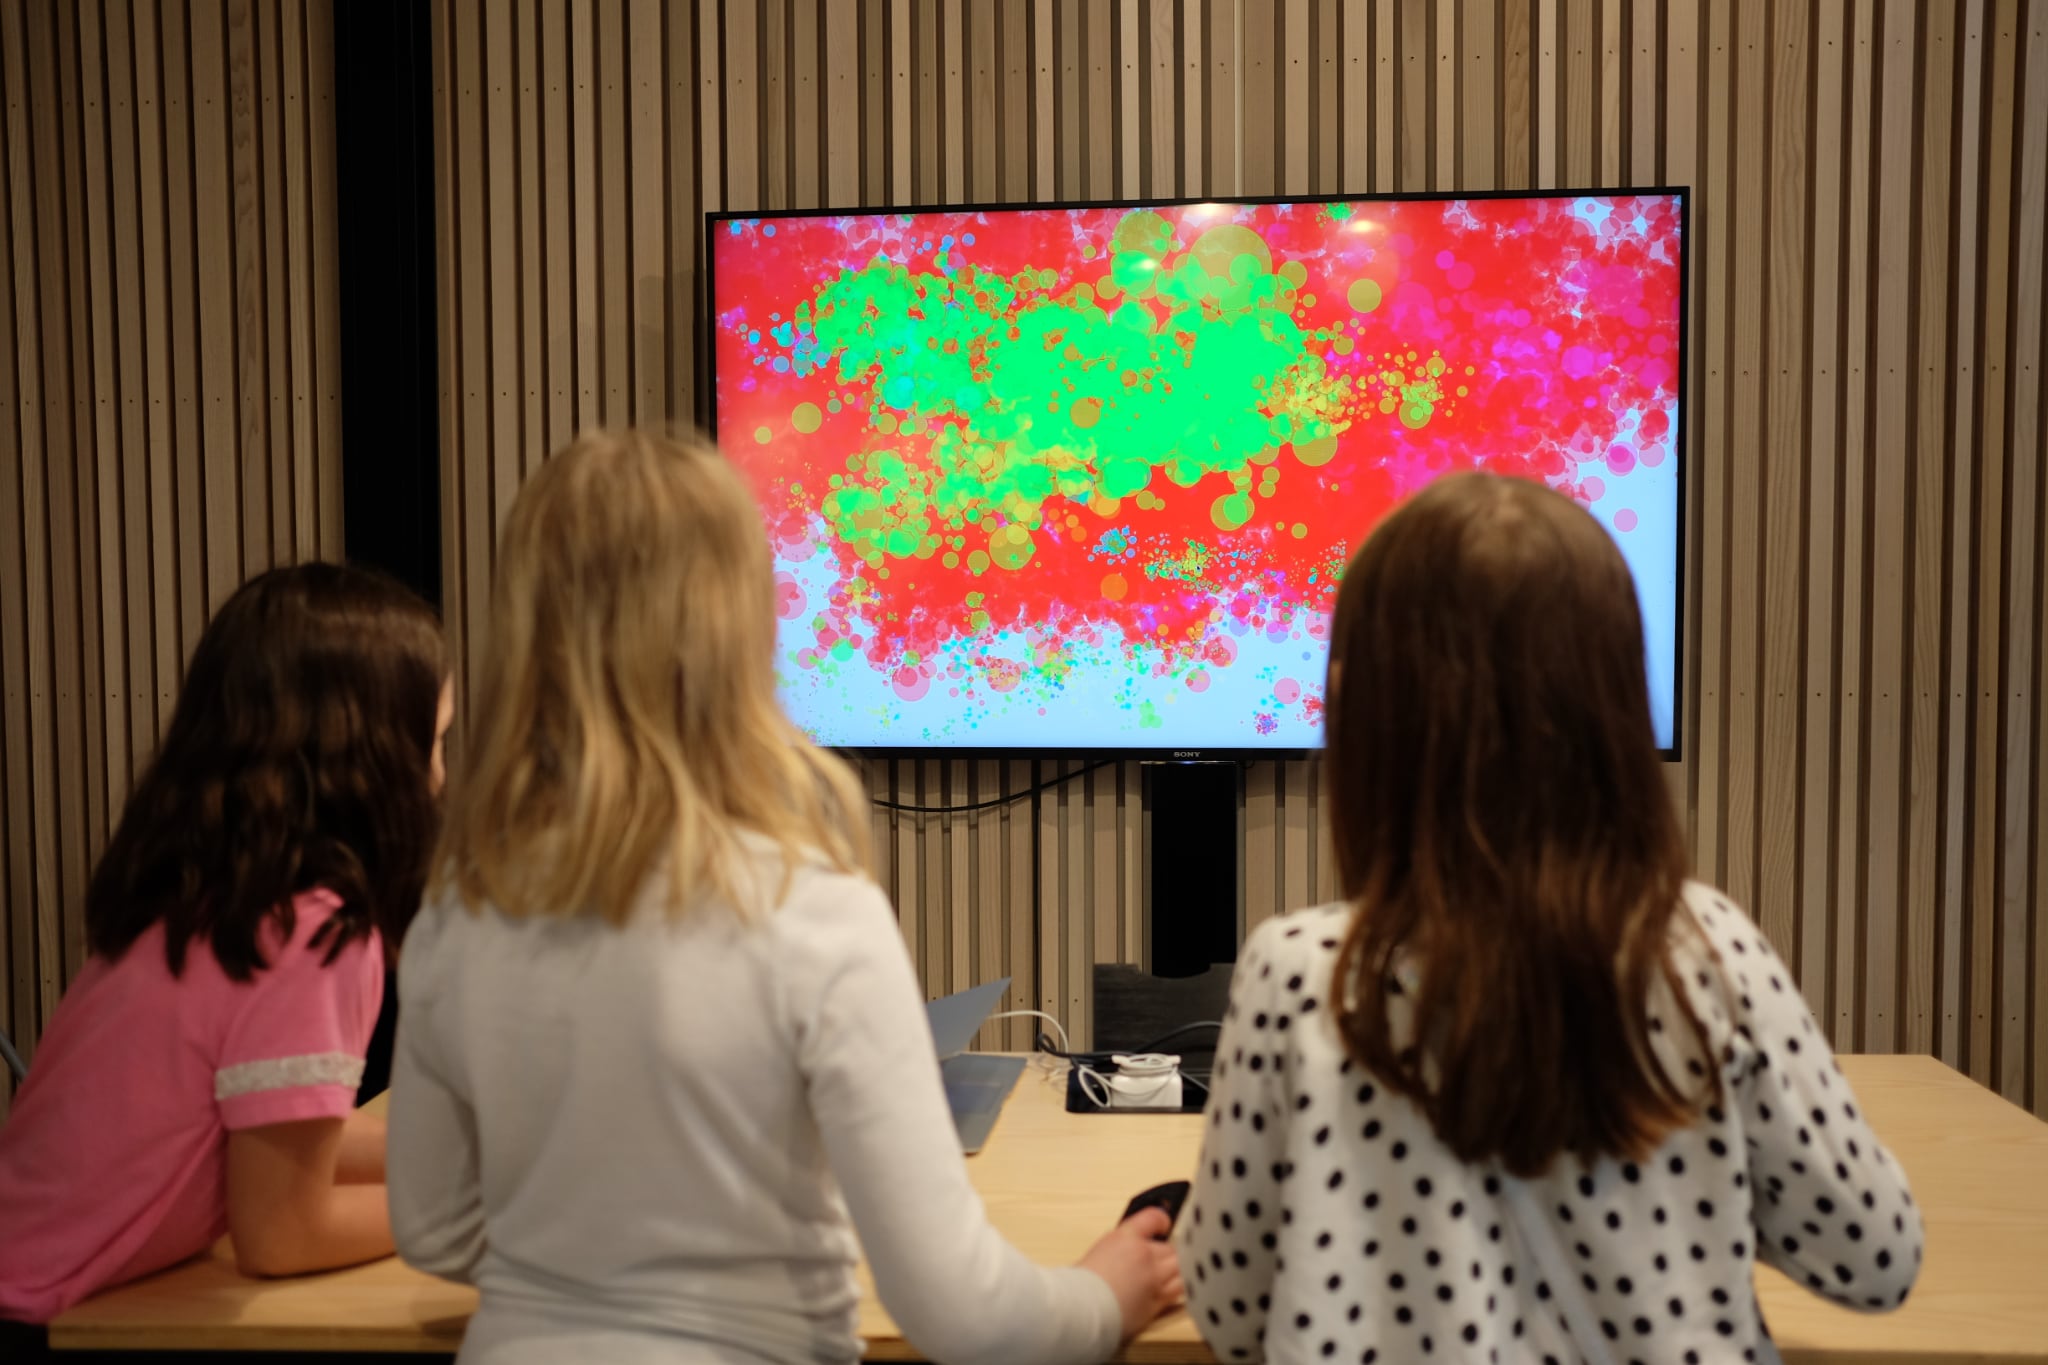 Kids standing in front of a screen with splashes of in color